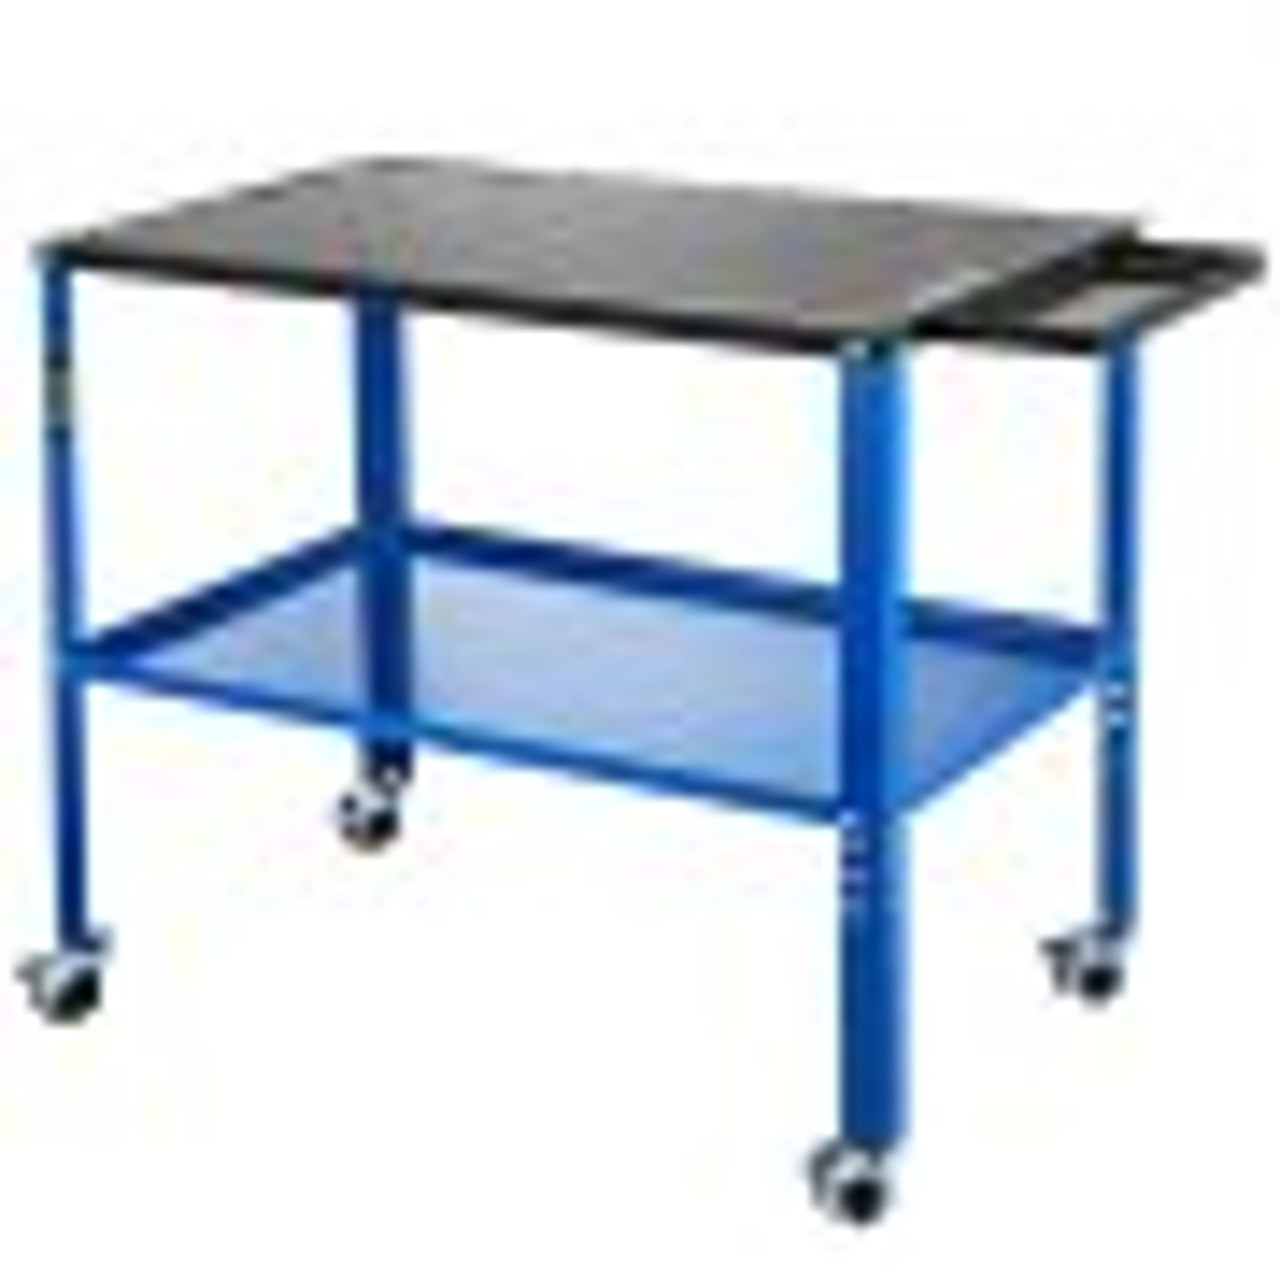 Portable Welding Table, 18" x 36" Spacious Table Top and 0.11" Thick Welding Workbench w/ 1200lb Load Capacity, Adjustable Fabrication Table Wheel for Easy Moving, Extra Middle Shelf for Storage